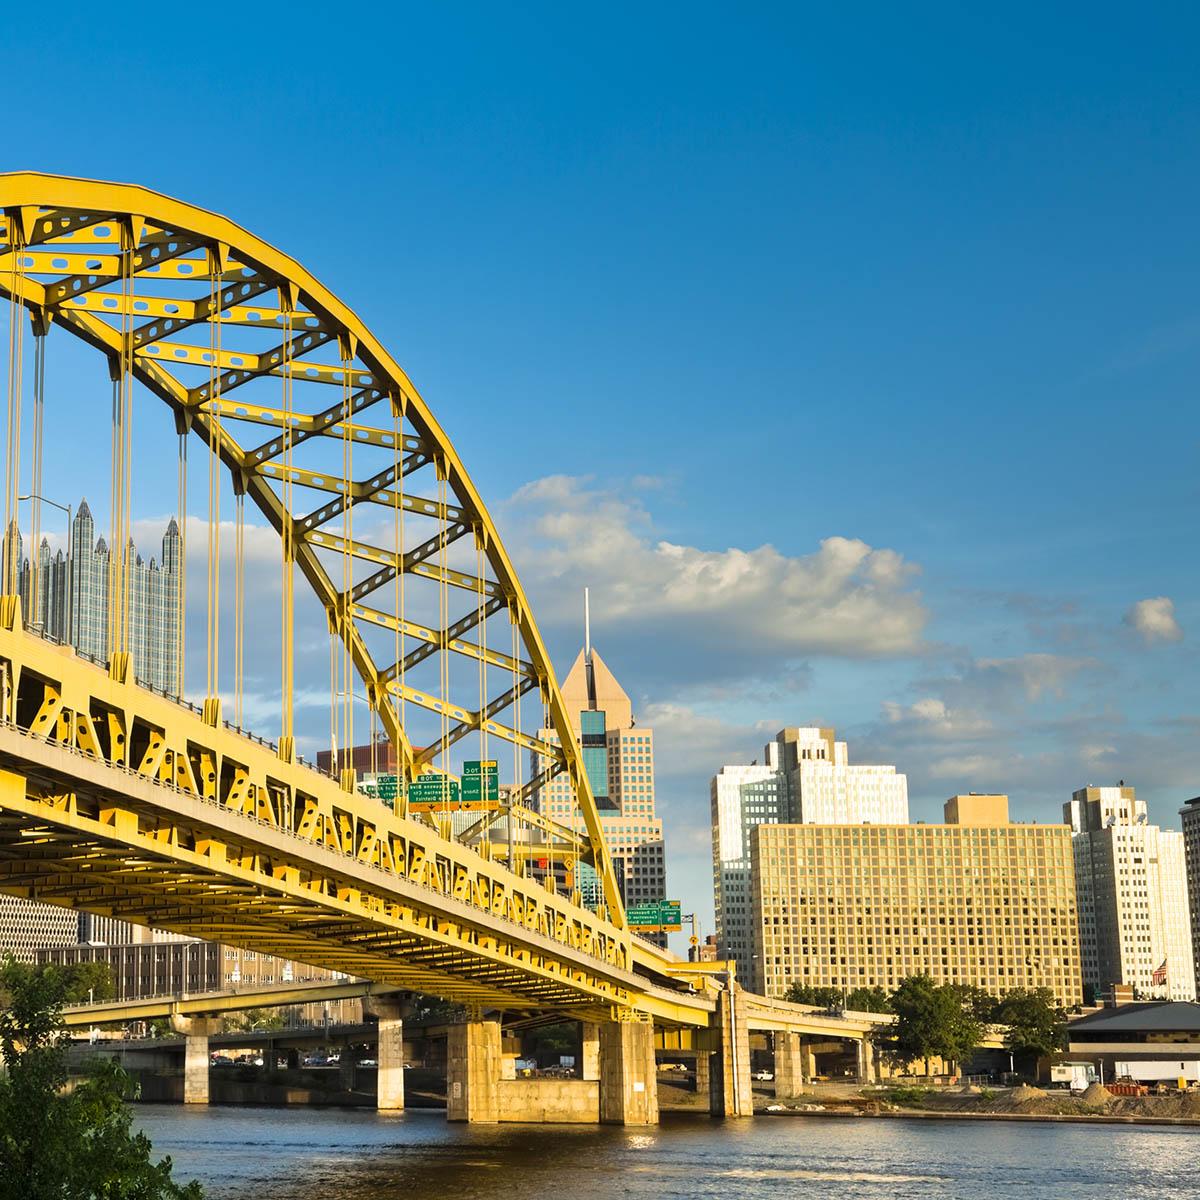 Photo of a yellow bridge over a river and the Pittsburgh skyline